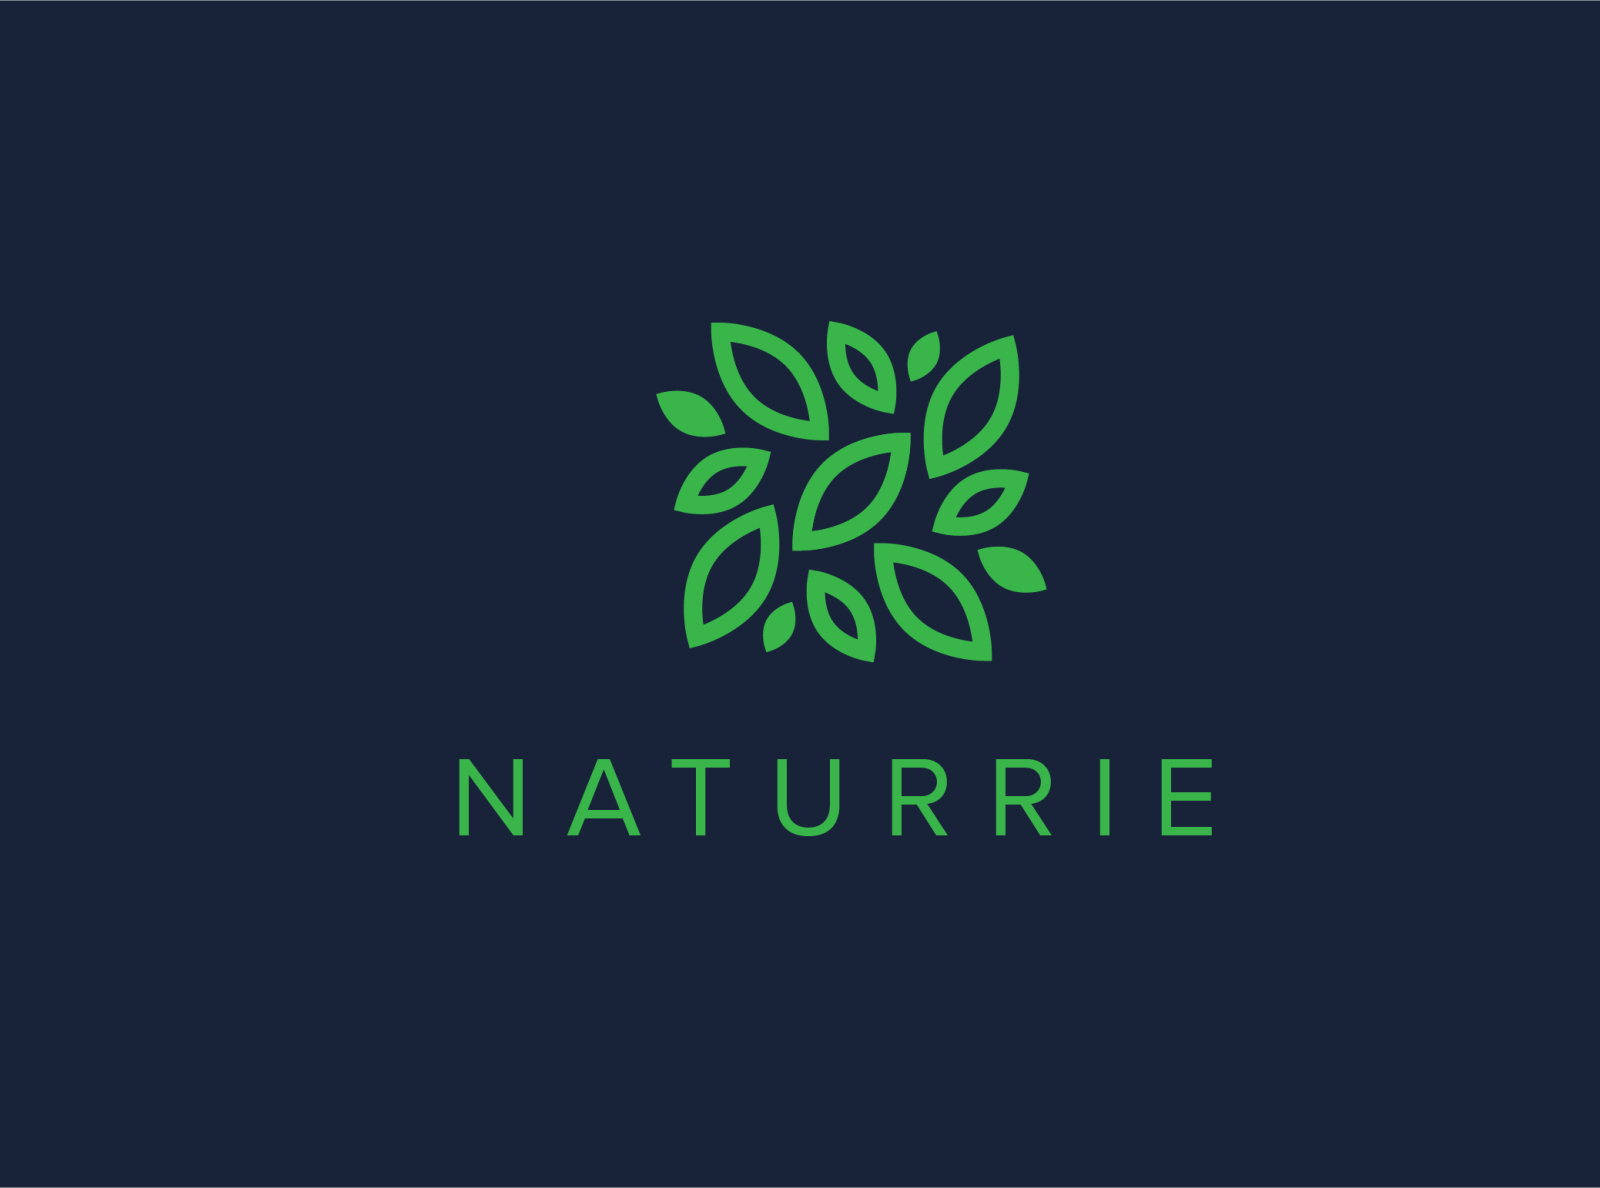 Naturrie logo by Ariful Islam on Dribbble